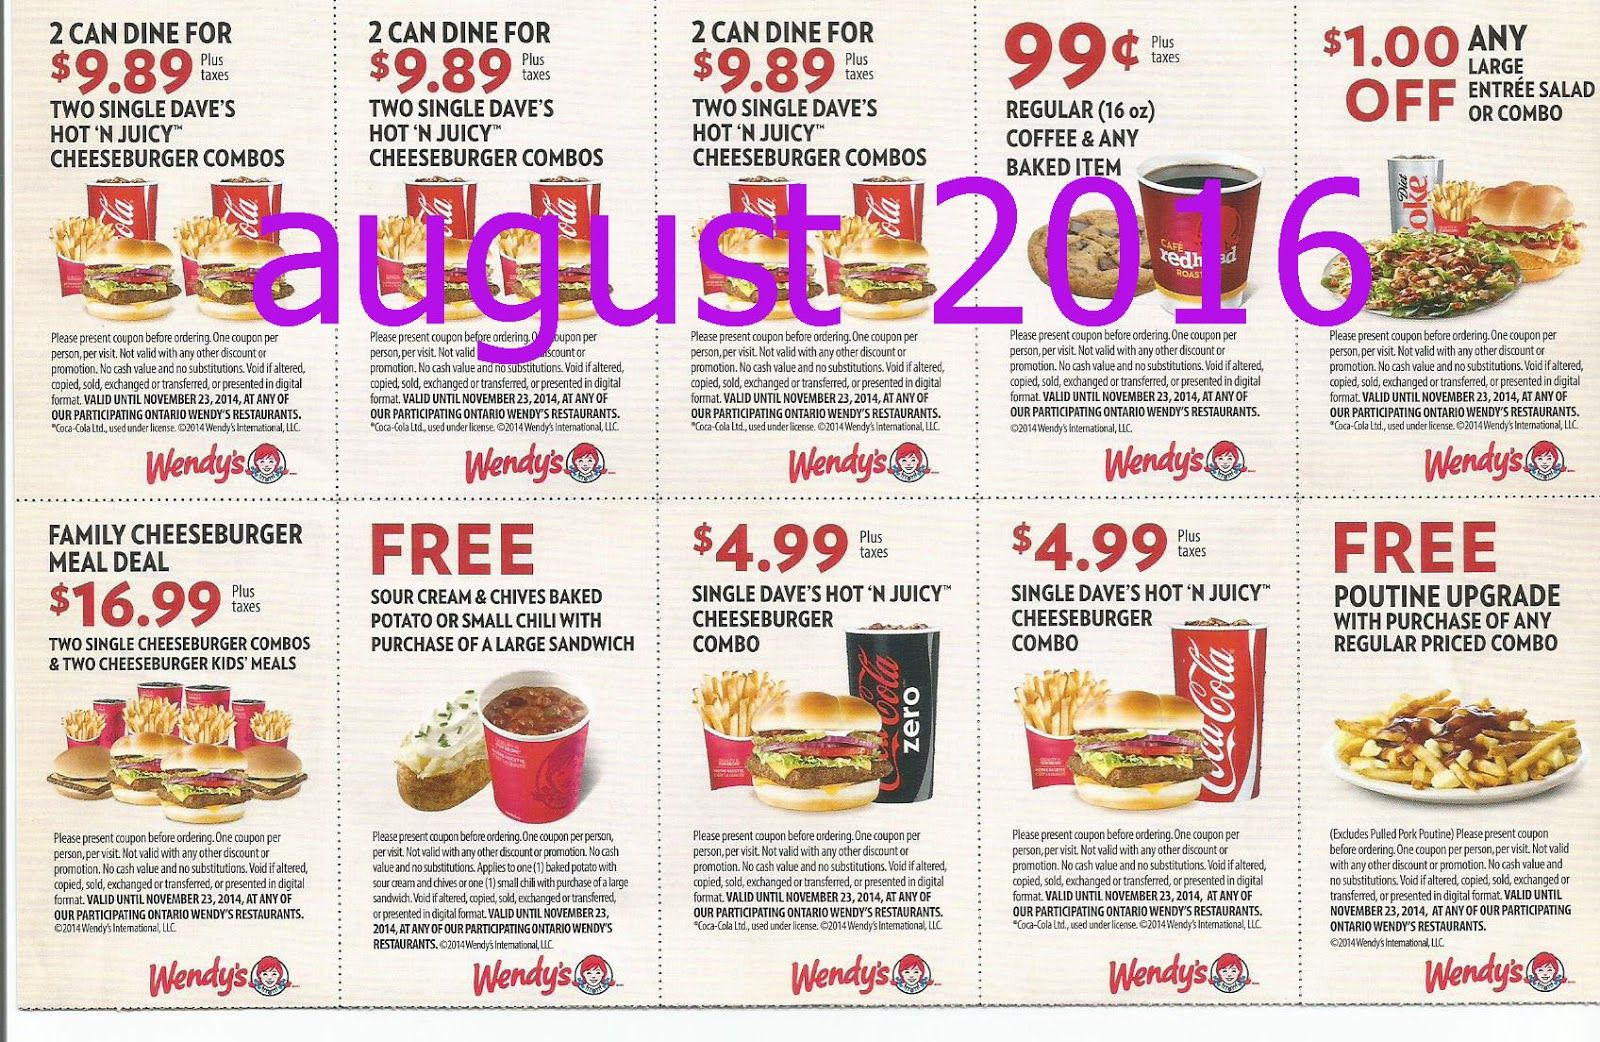 Free Printable Coupons: Wendys Coupons | Fast Food Coupons - Free Mcdonalds Smoothie Printable Coupon